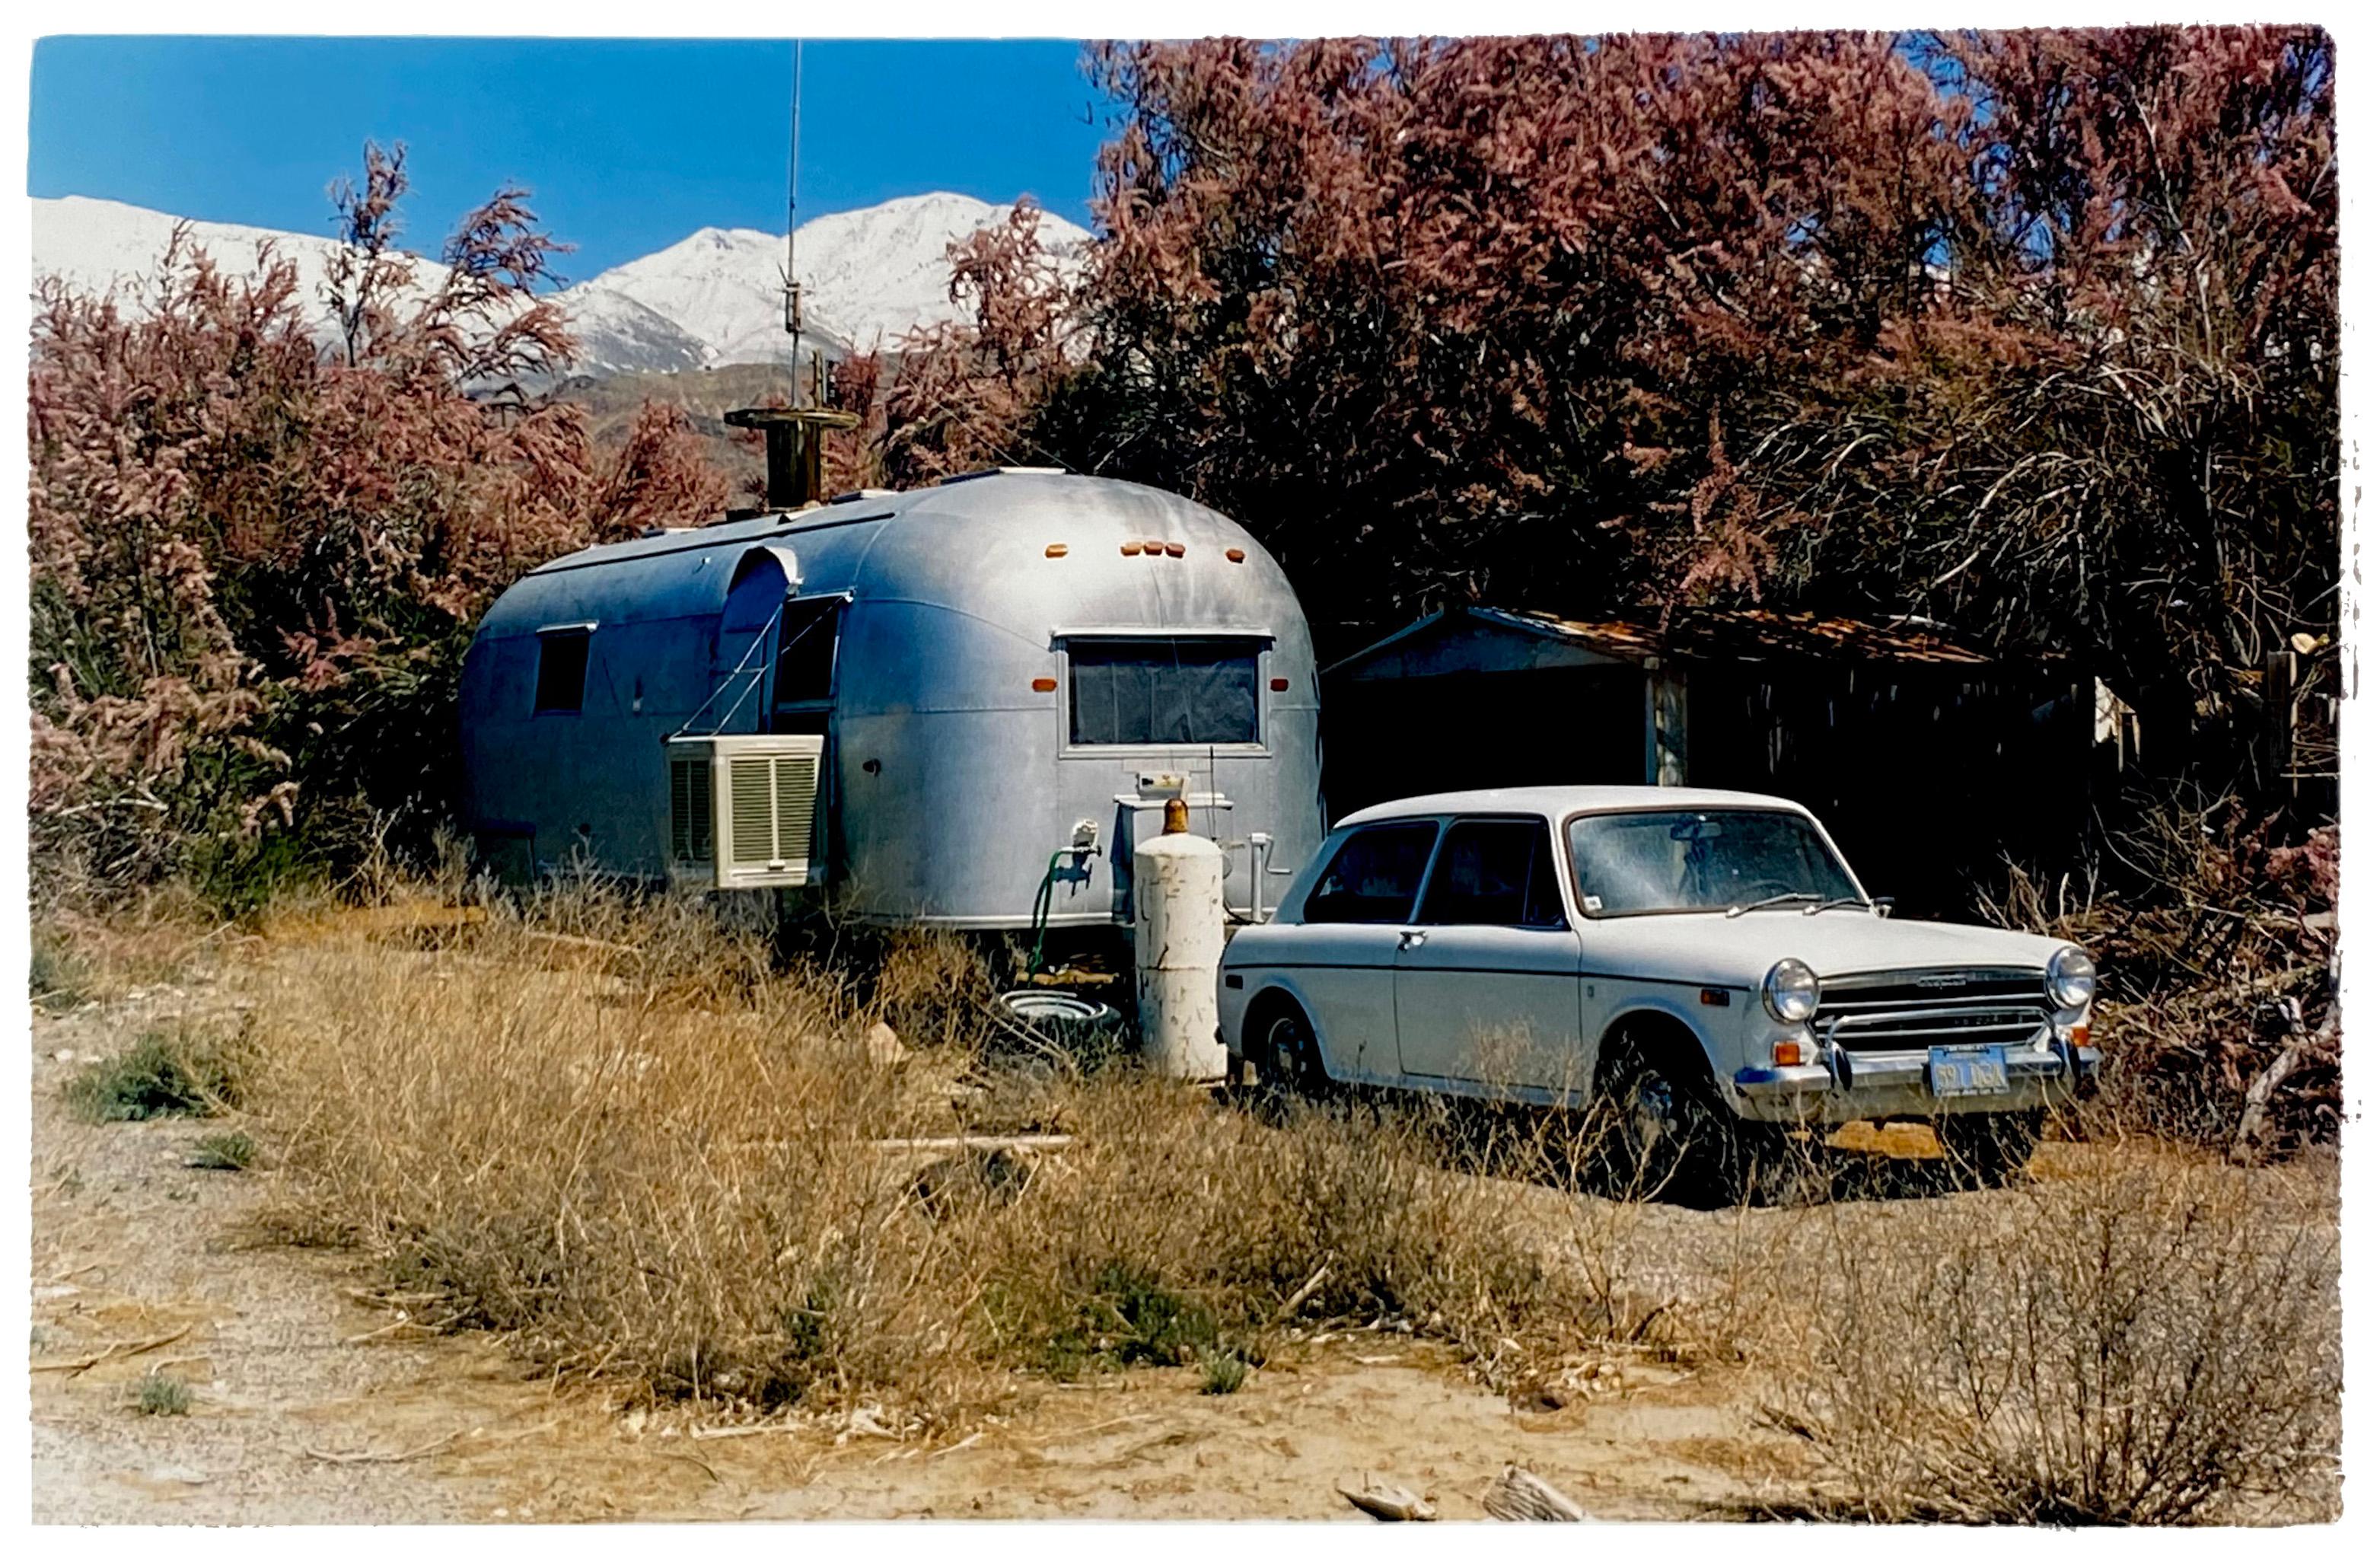 Richard Heeps Landscape Photograph - Austin and Airstream, Keeler, California - American Color Photography